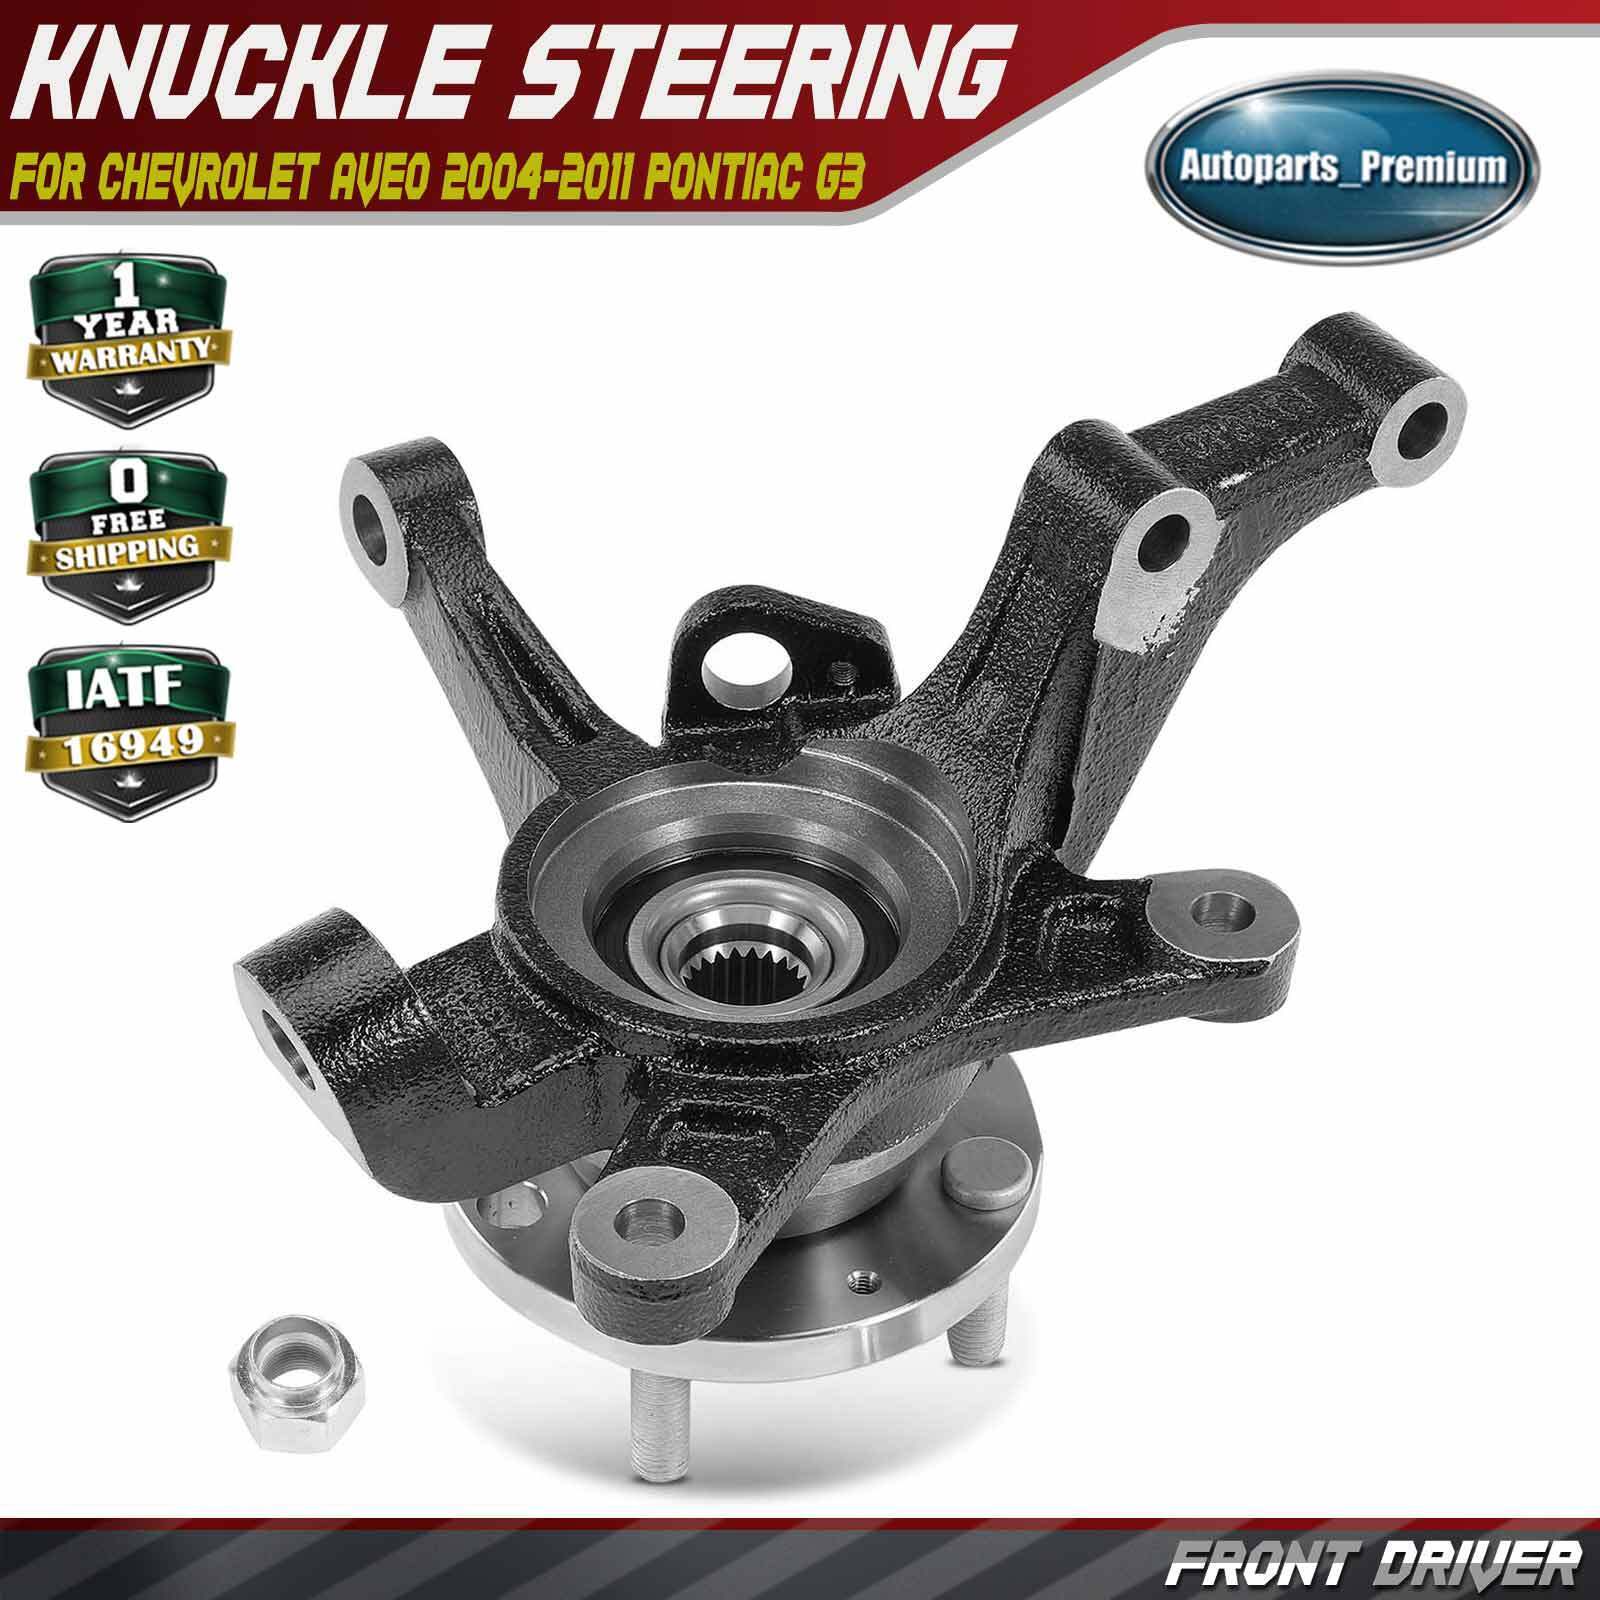 Front LH Steering Knuckle Assembly for Chevrolet Aveo 2004-2011 Aveo5 Pontiac G3